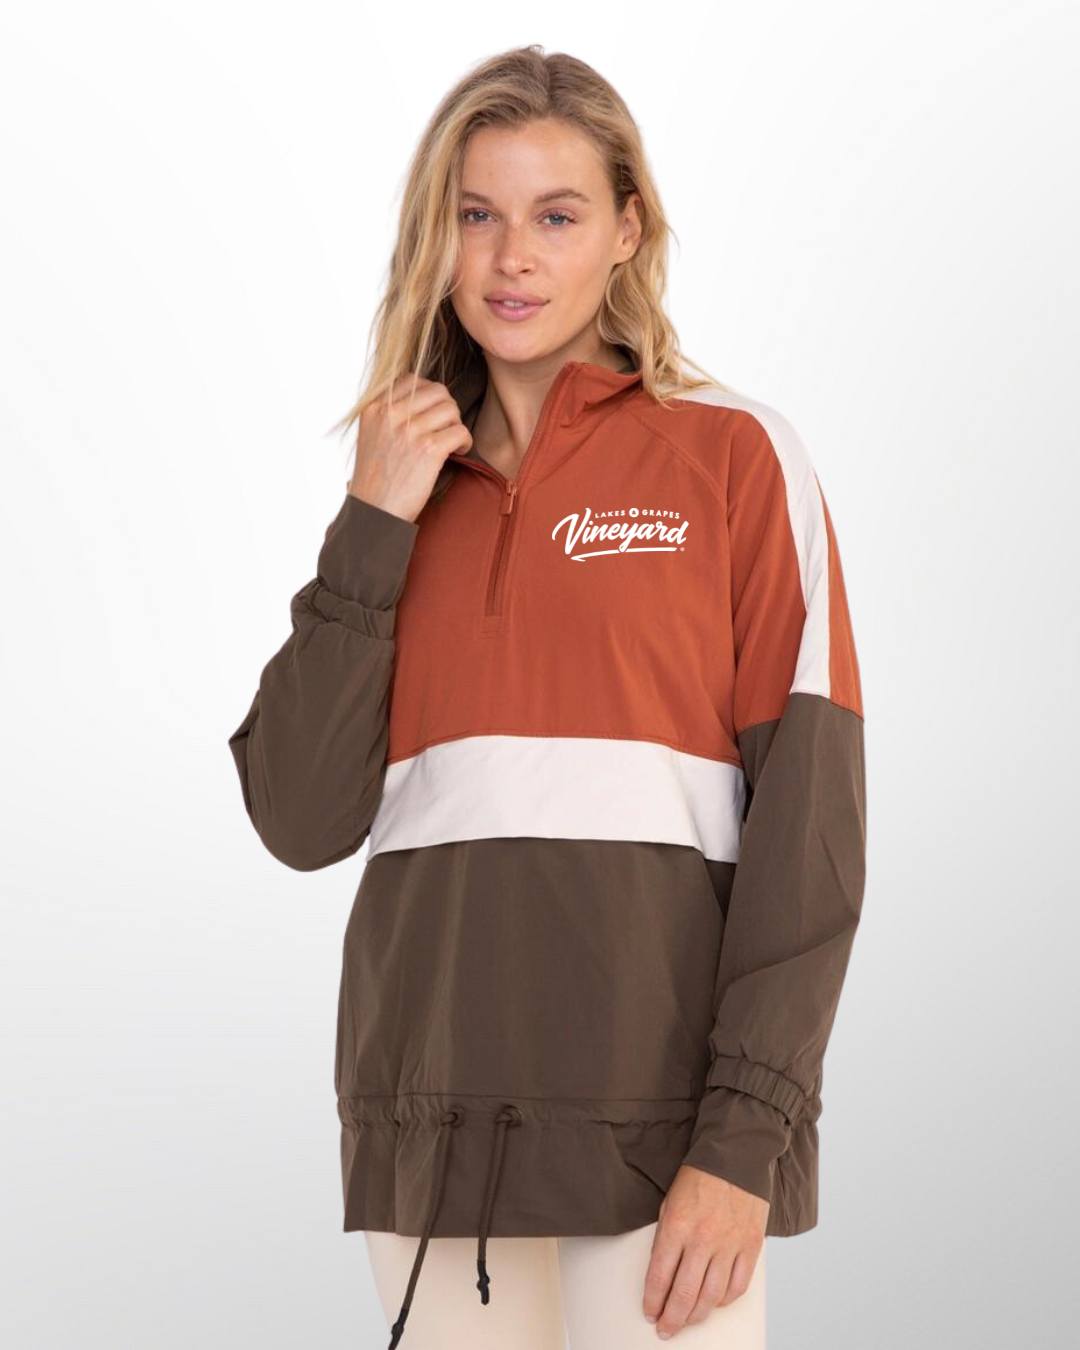 The image shows a Women's Vineyard Active Pullover, a versatile and comfortable athletic wear. The pullover features a lightweight, breathable fabric ideal for active pursuits. It has a crew neckline and long sleeves, providing full coverage and protection.